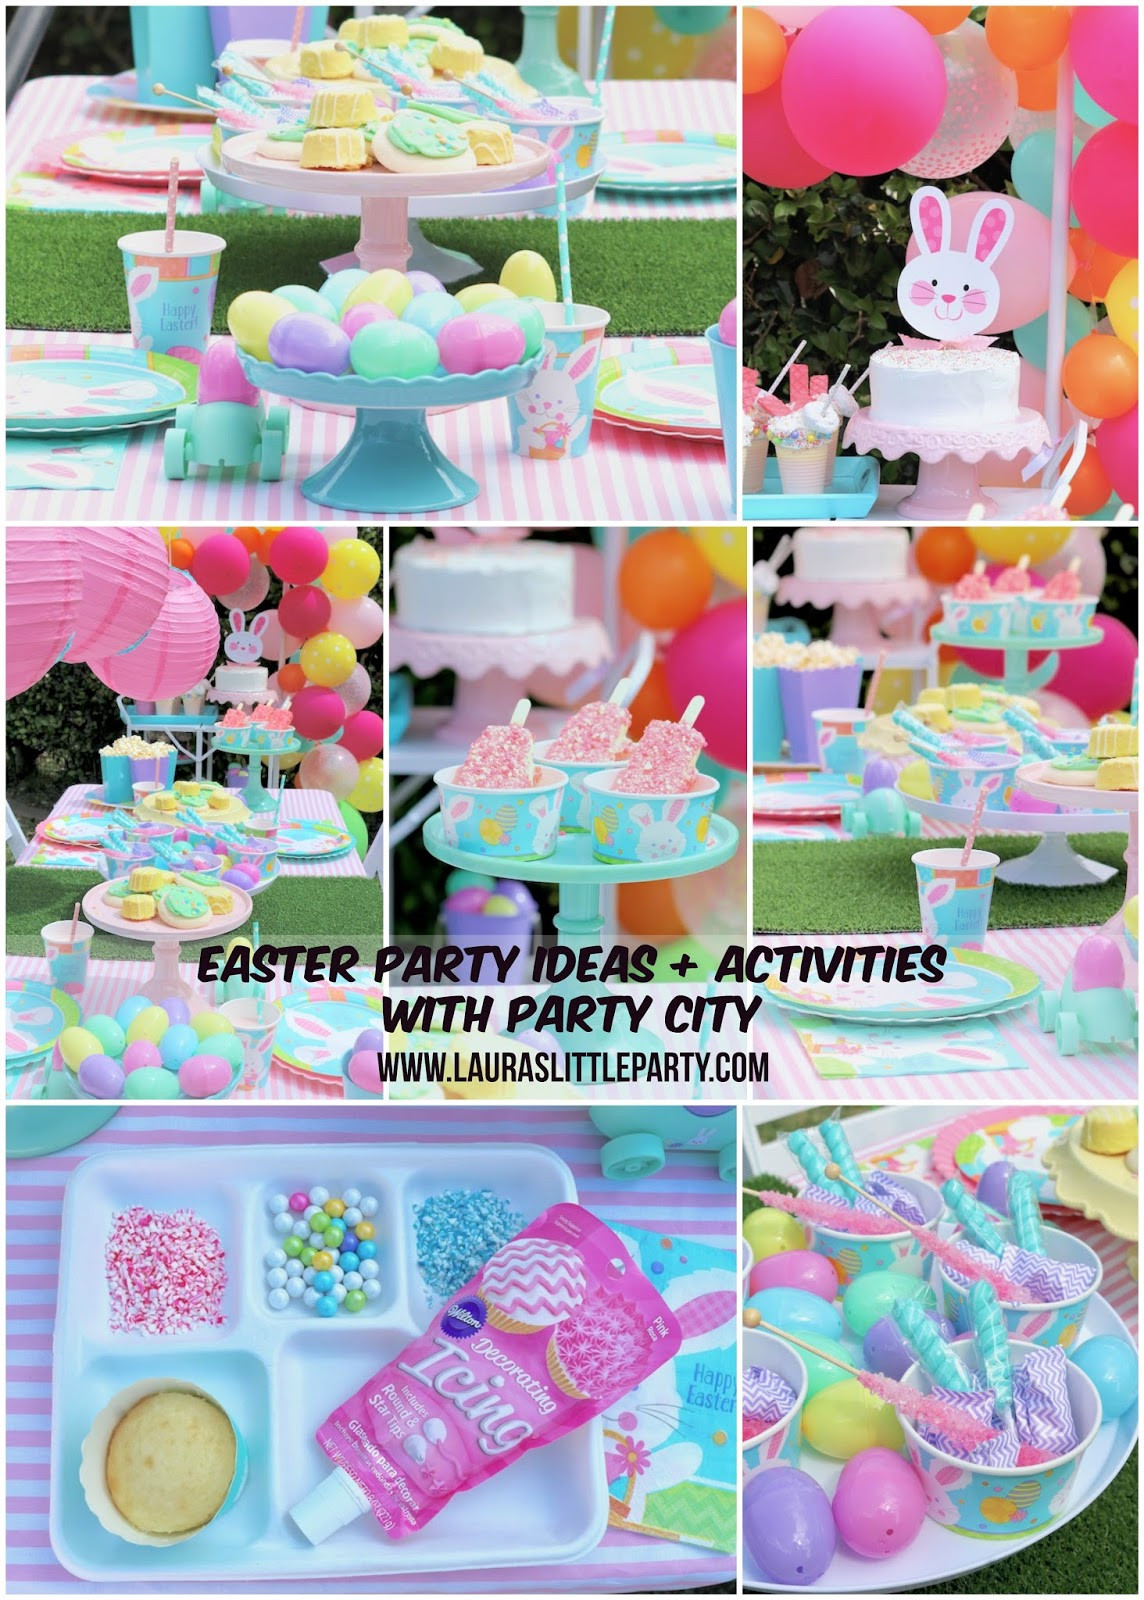 Easter Entertaining &amp; Party Ideas
 Easter Party Ideas with Party City LAURA S little PARTY